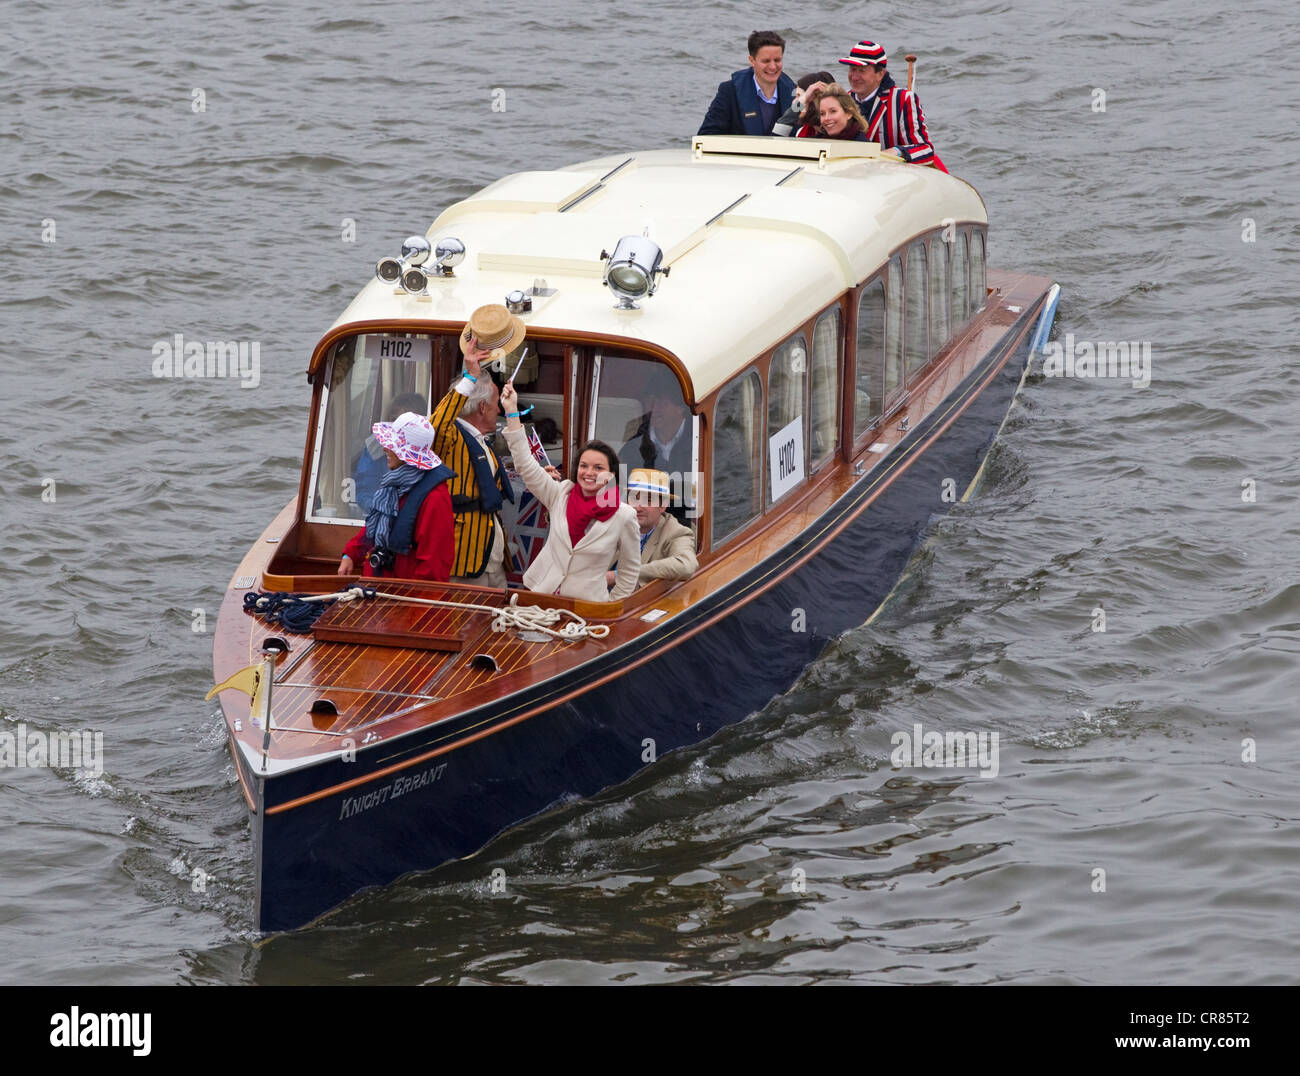 A Thames Slipper Stern, Knight Errant, participating in the Queen's Diamond Jubilee River Pageant Stock Photo